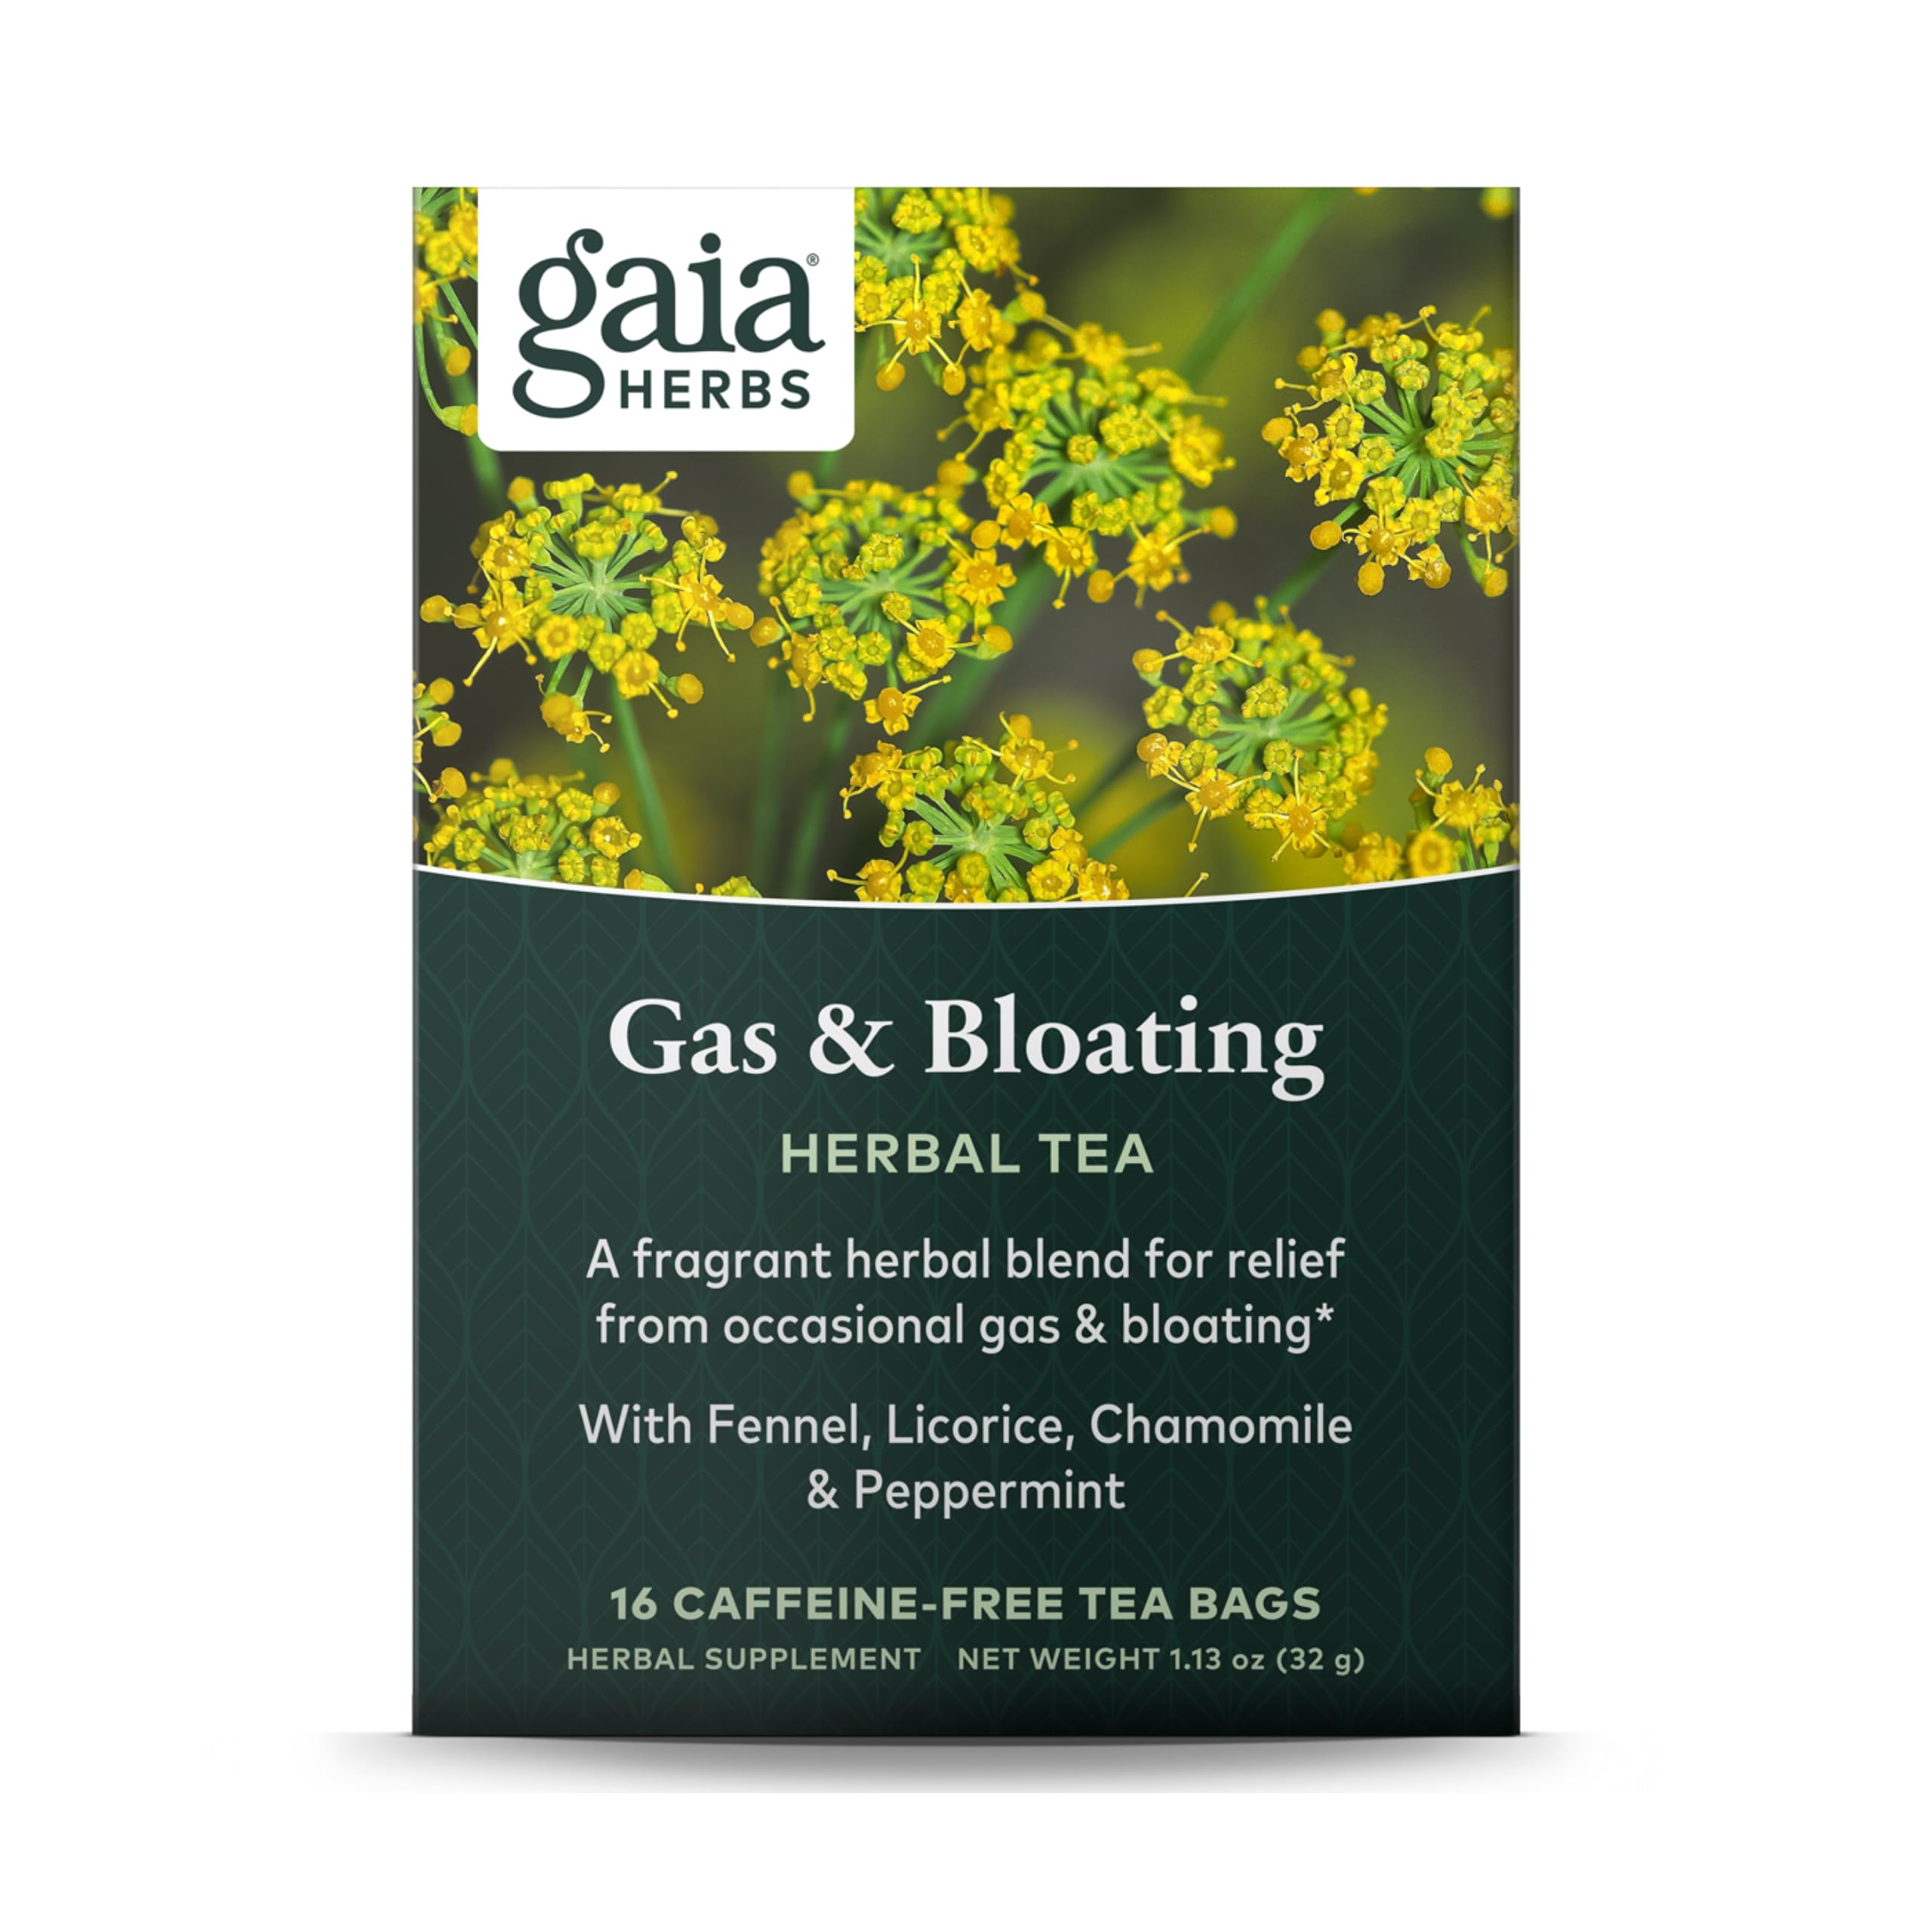 Gaia Herbs Gas & Bloating Herbal Tea - Supports Relief for Digestive Discomfort, Gas & Bloating - With Fennel, Licorice Root, Chamomile & More - 16 Caffeine-Free Herbal Tea Bags (1 Box of 16 Bags)